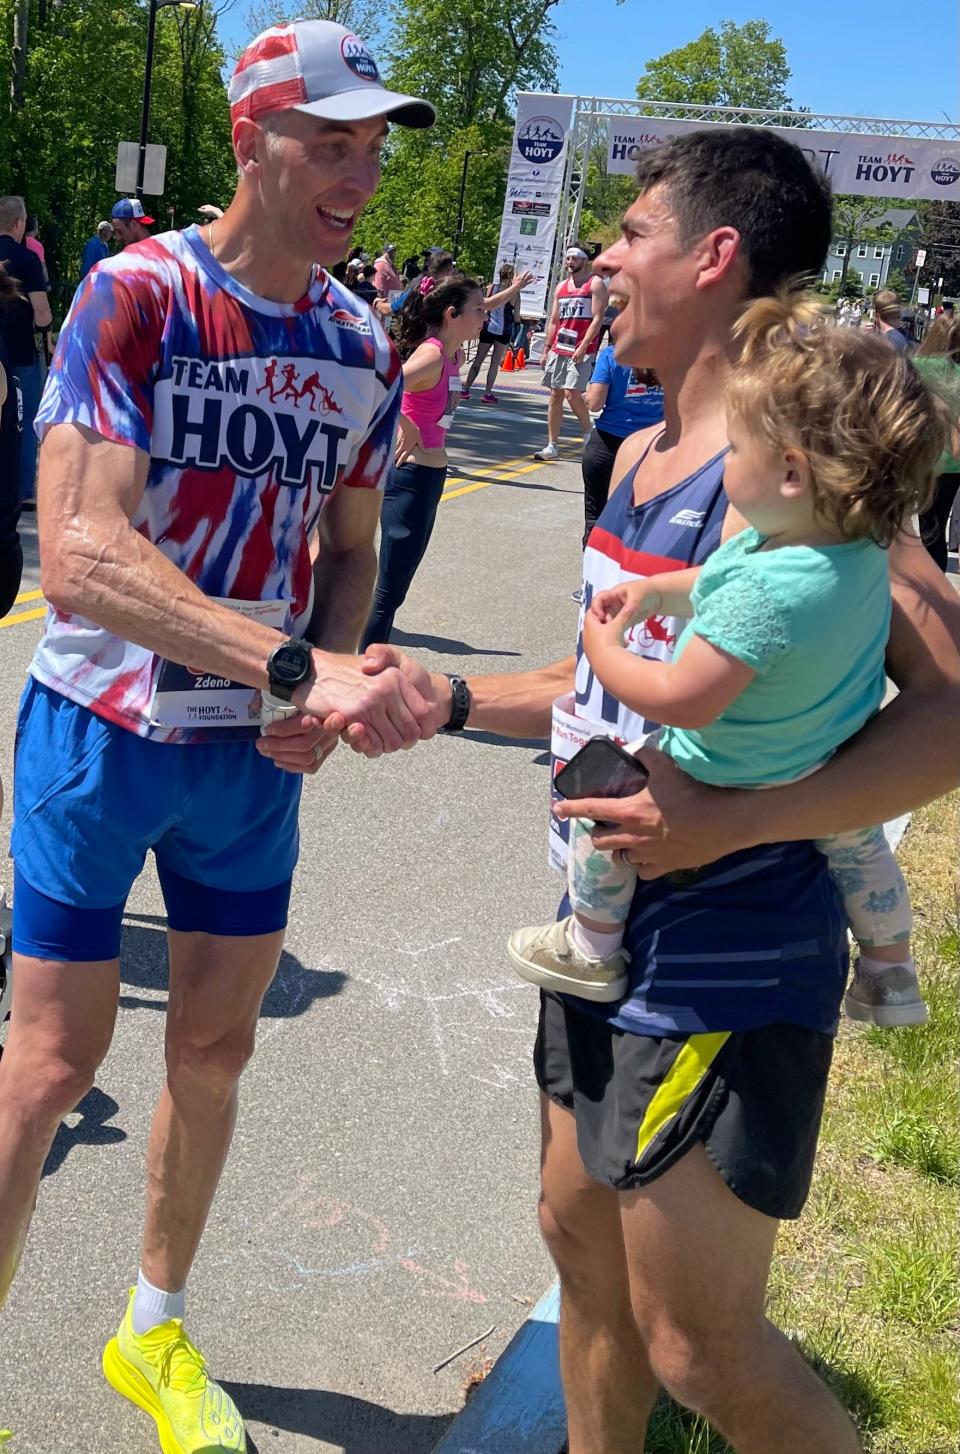 Former Boston Bruins captain Zdeno Chara greets a finisher at Saturday's Dick Hoyt Memorial Yes You Can road race in Hopkinton.